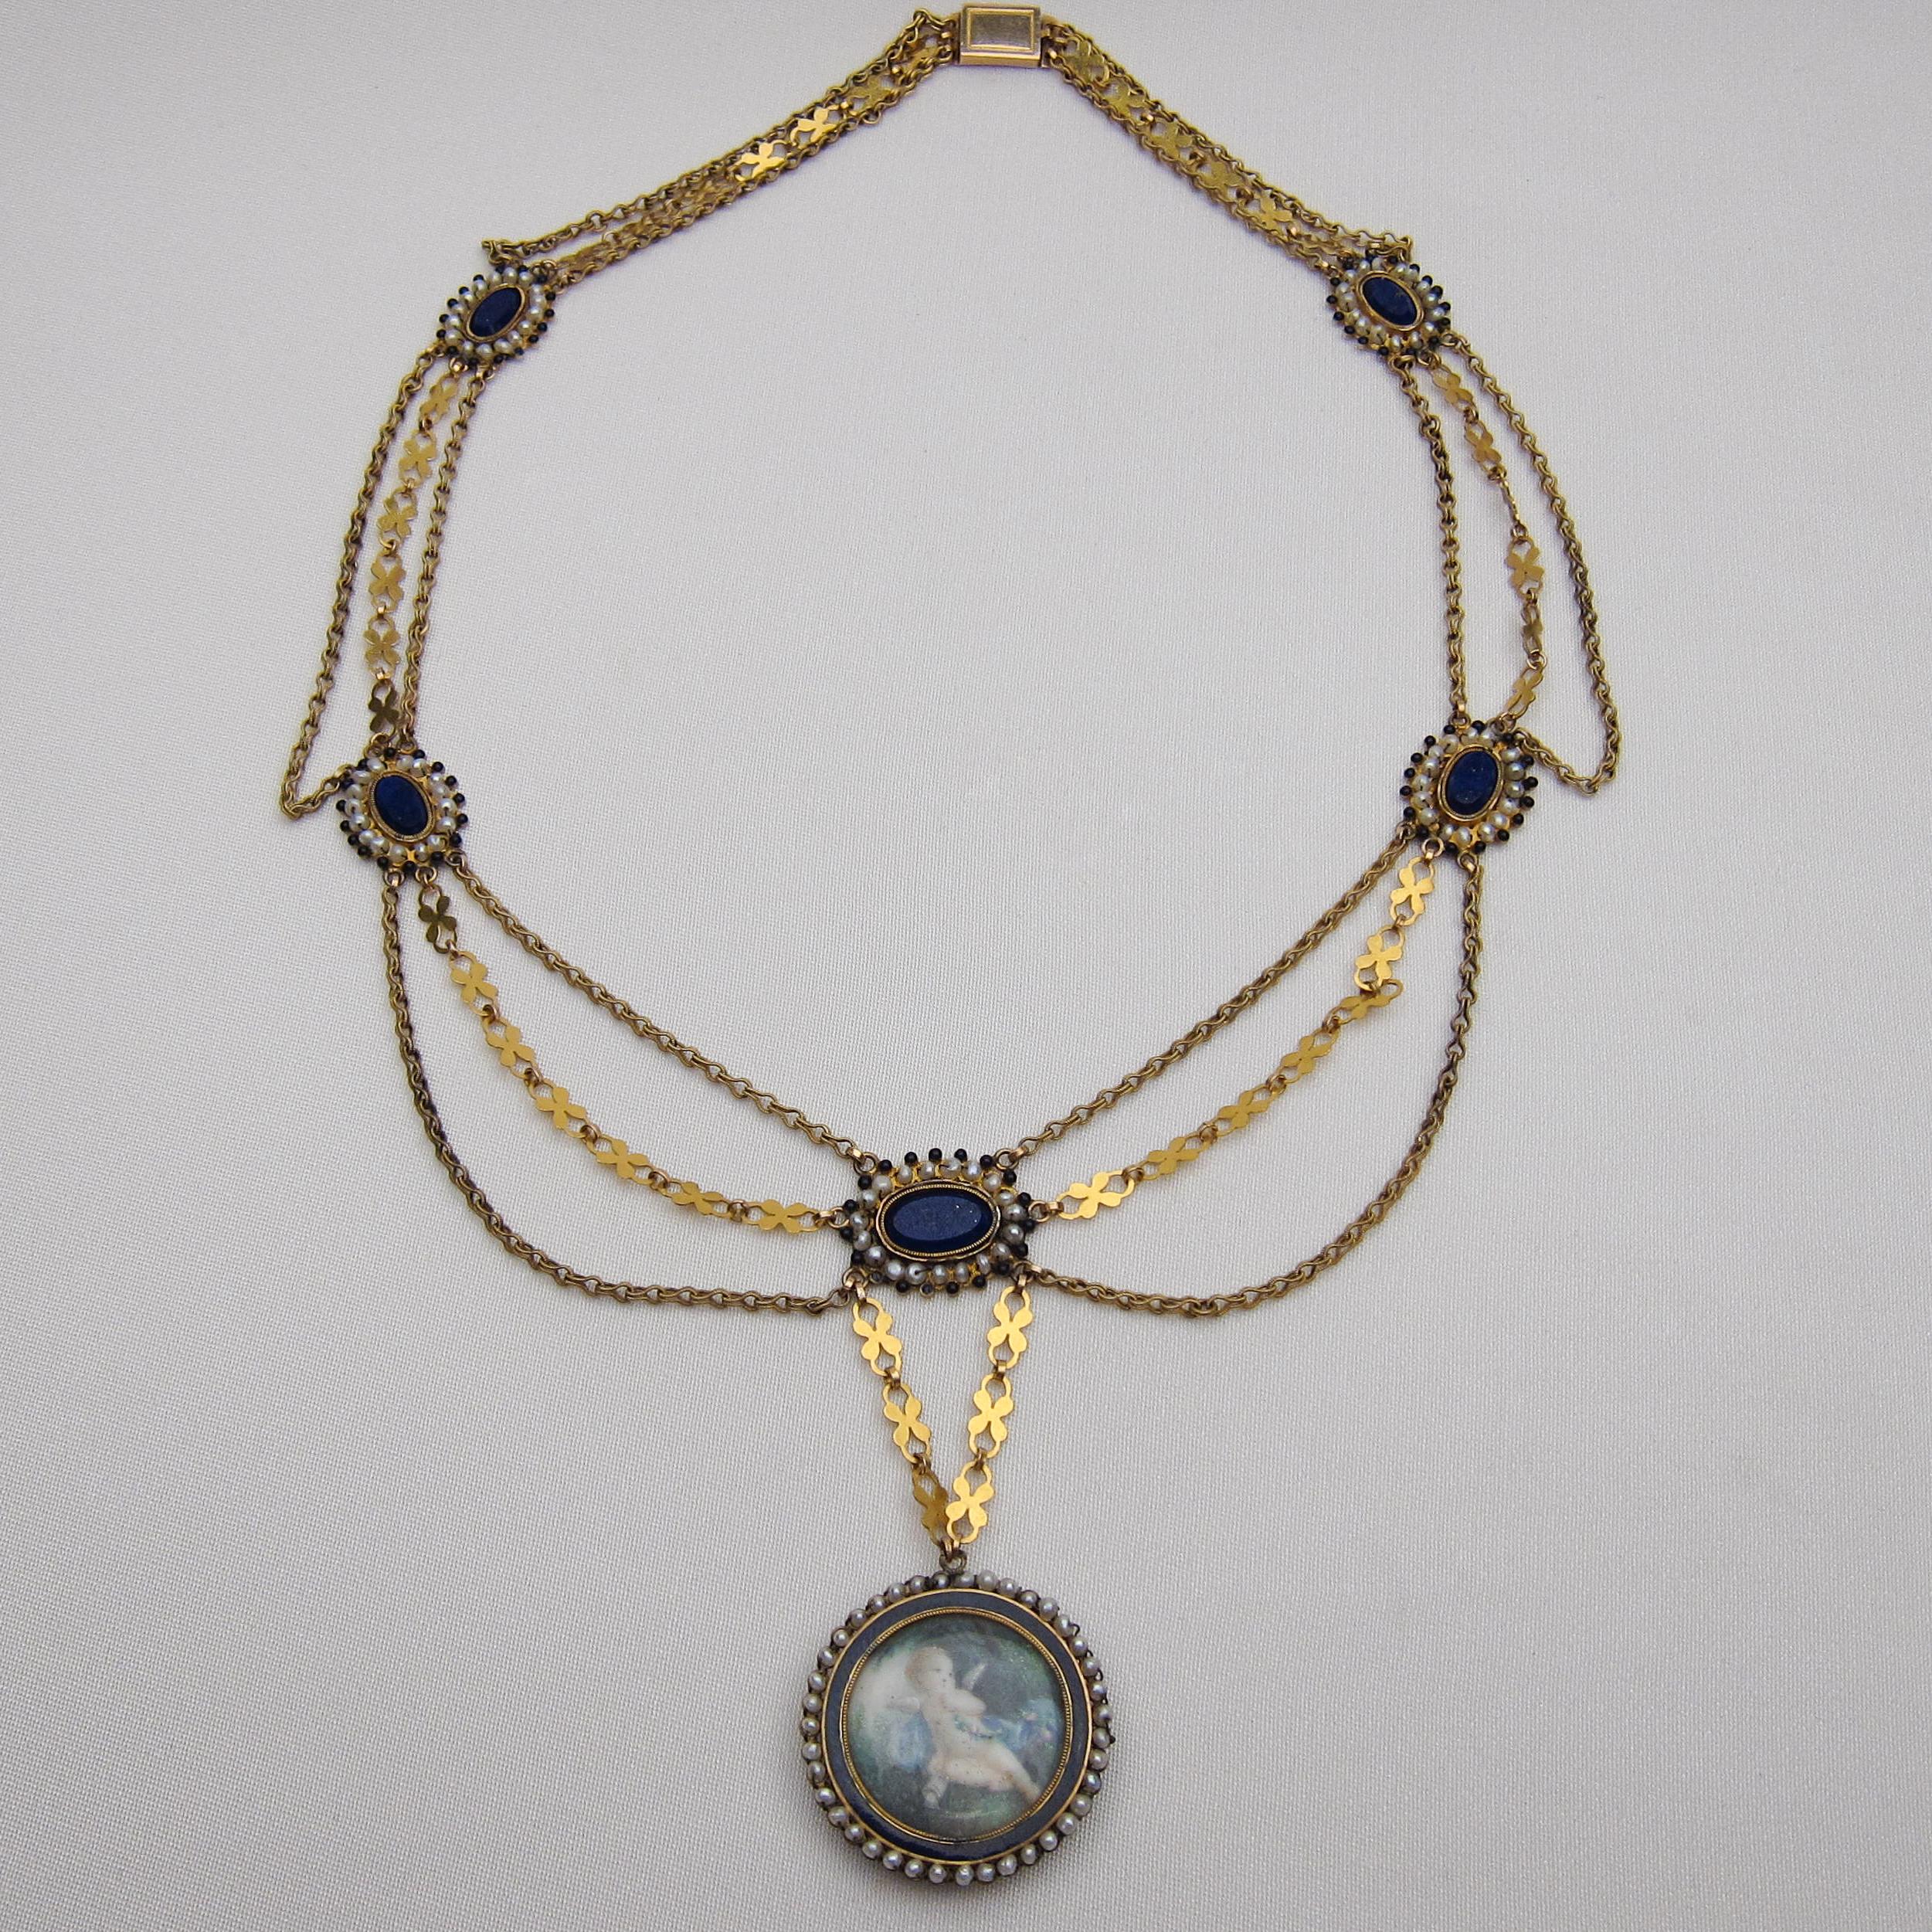 Circa 1790. This fantastic fancy link 18KT gold swag necklace features a round pendant measuring 25mm in diameter and hand-painted with a cherub (putto) scene. The pendant is encircled by a 2mm wide blue enamel strip, seed pearls, and blue glass